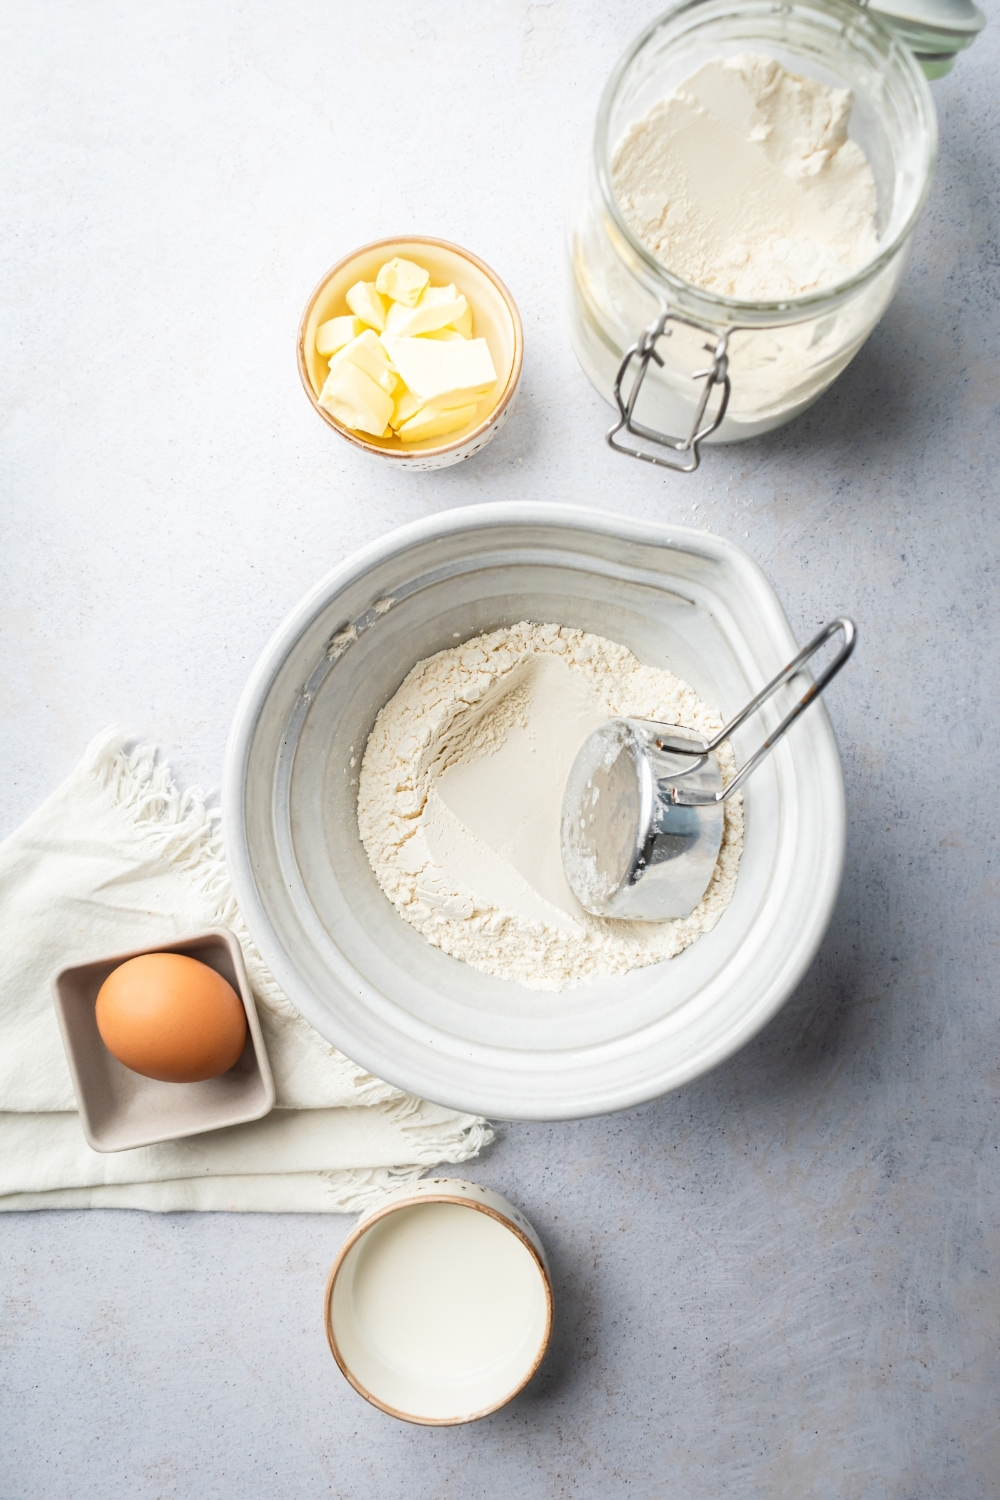 A white bowl filled with flour, an egg, small bowl with butter cubes, and a glass jar of flour all on a gray counter.